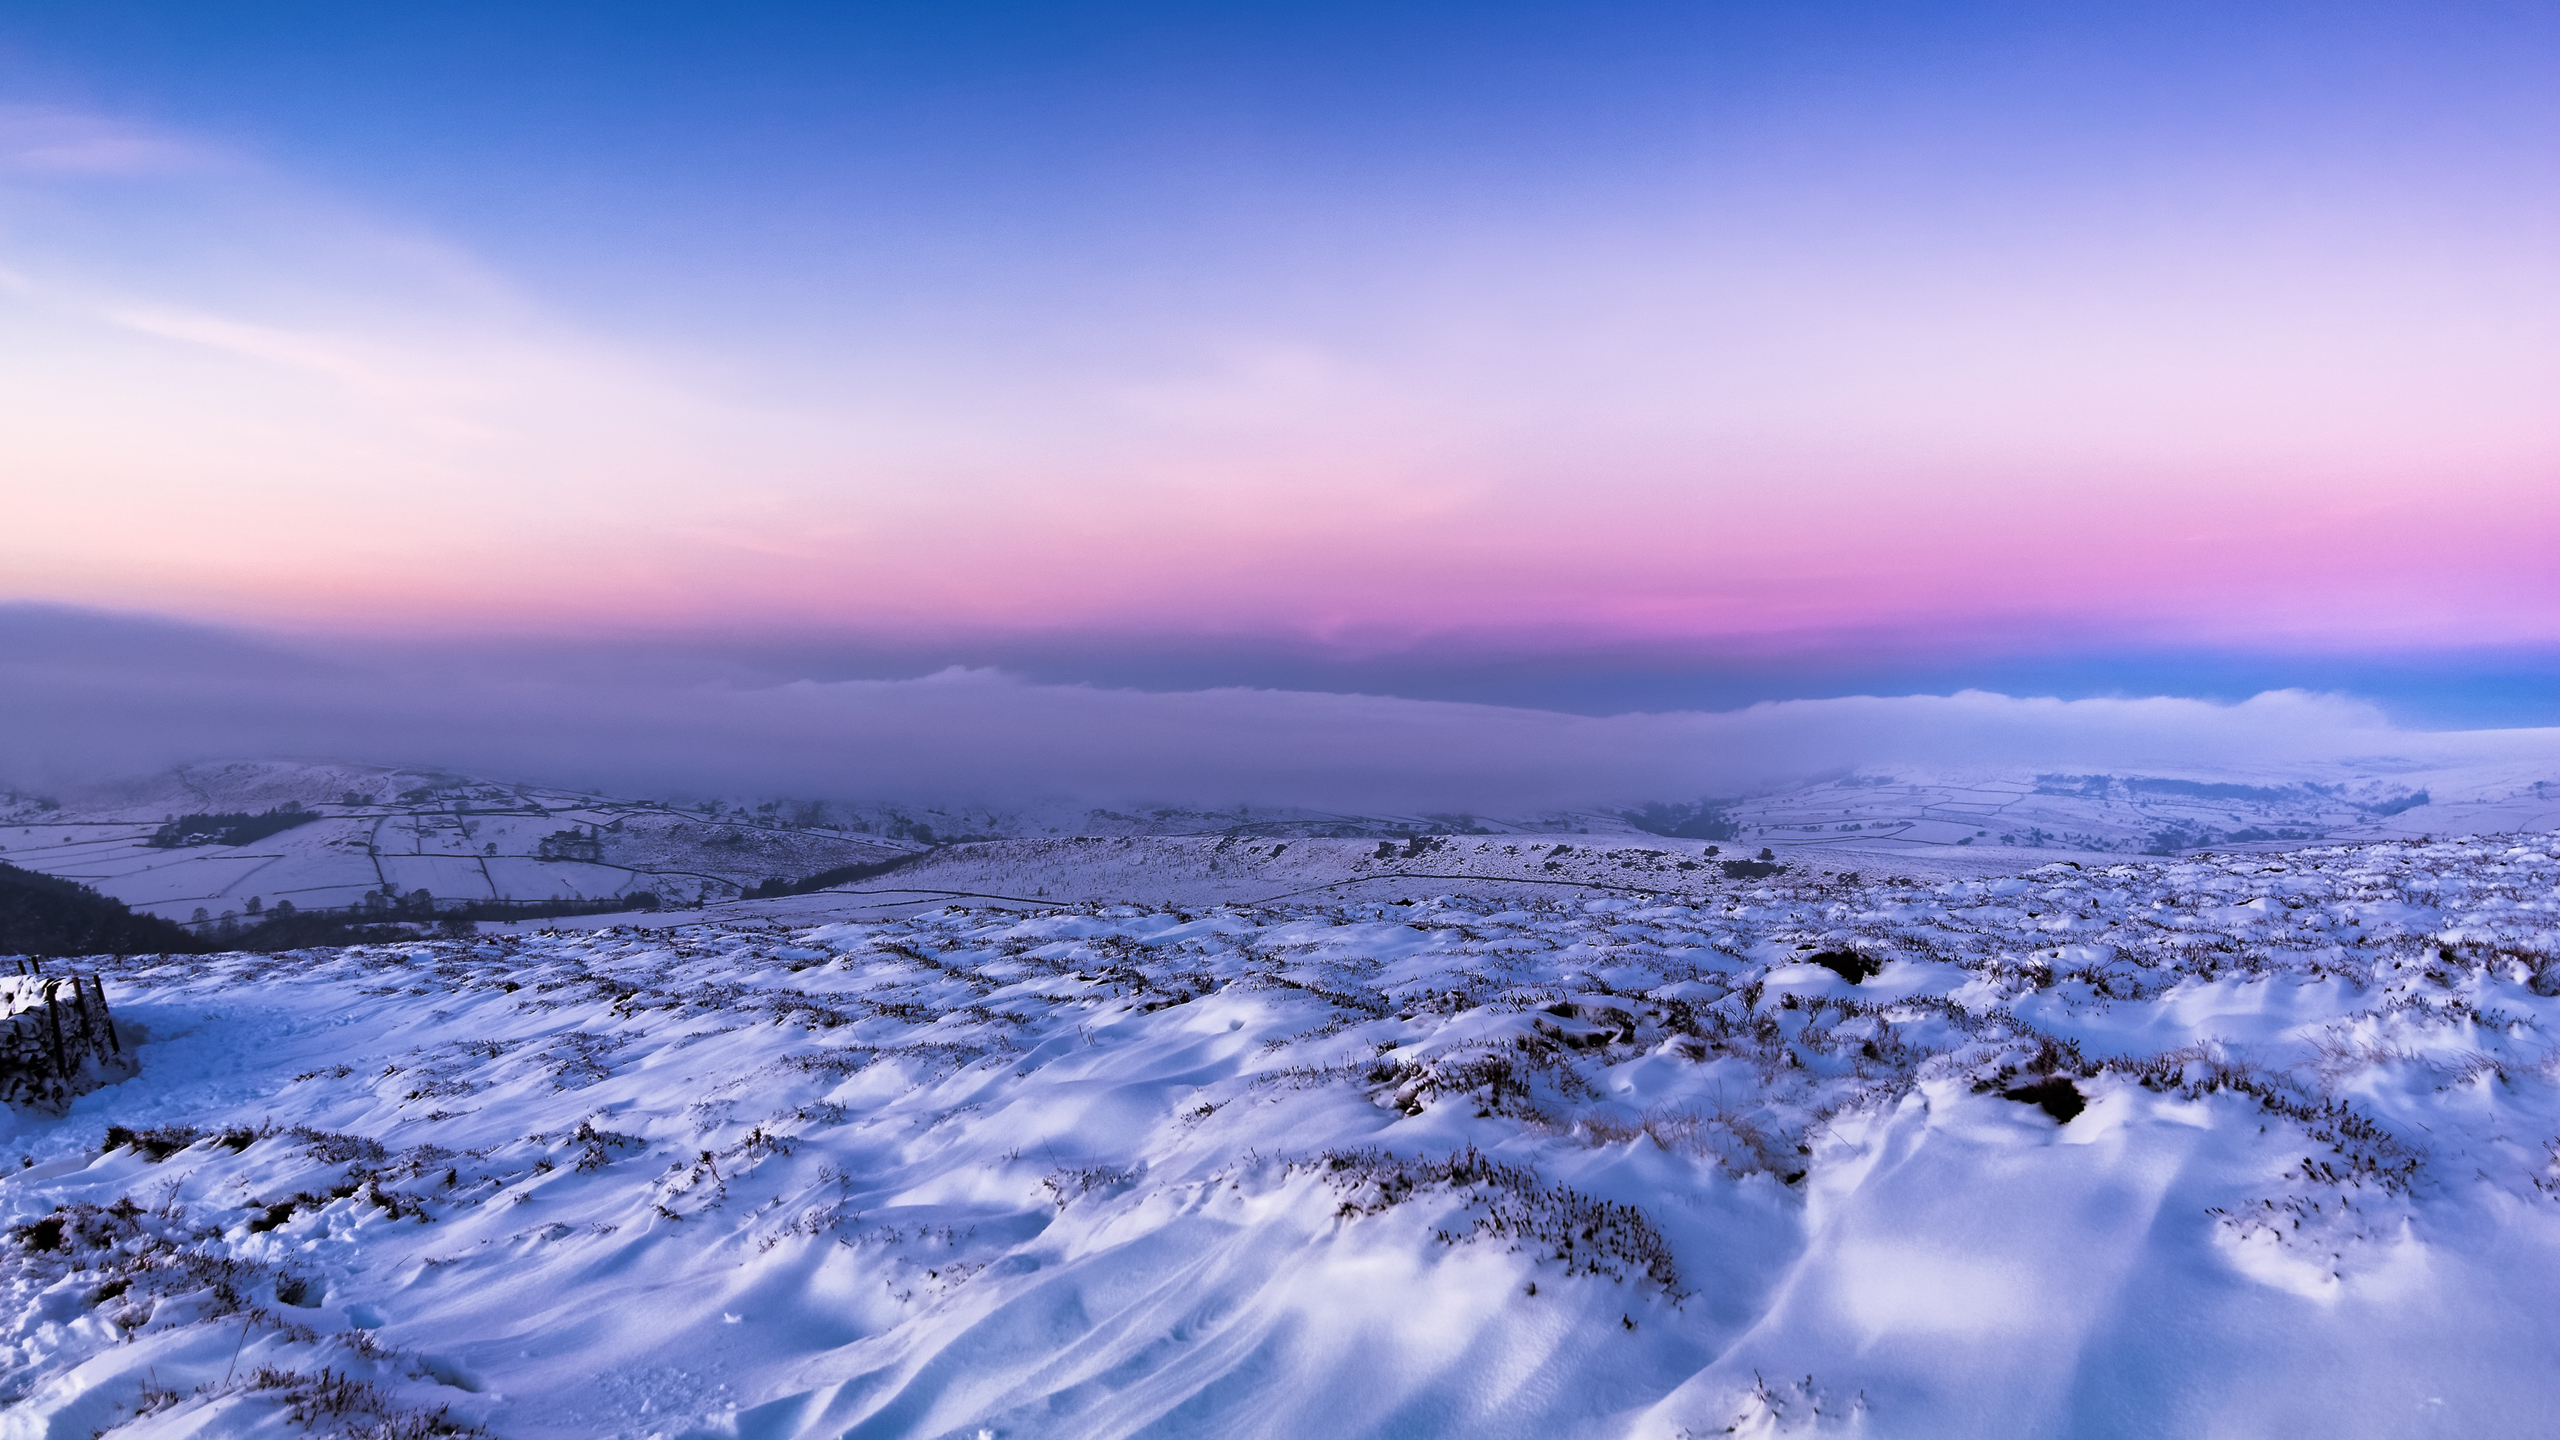 Frozen Snow Covered Rocks Mountains Under Light Pink Blue Clouds Sky 2K Nature